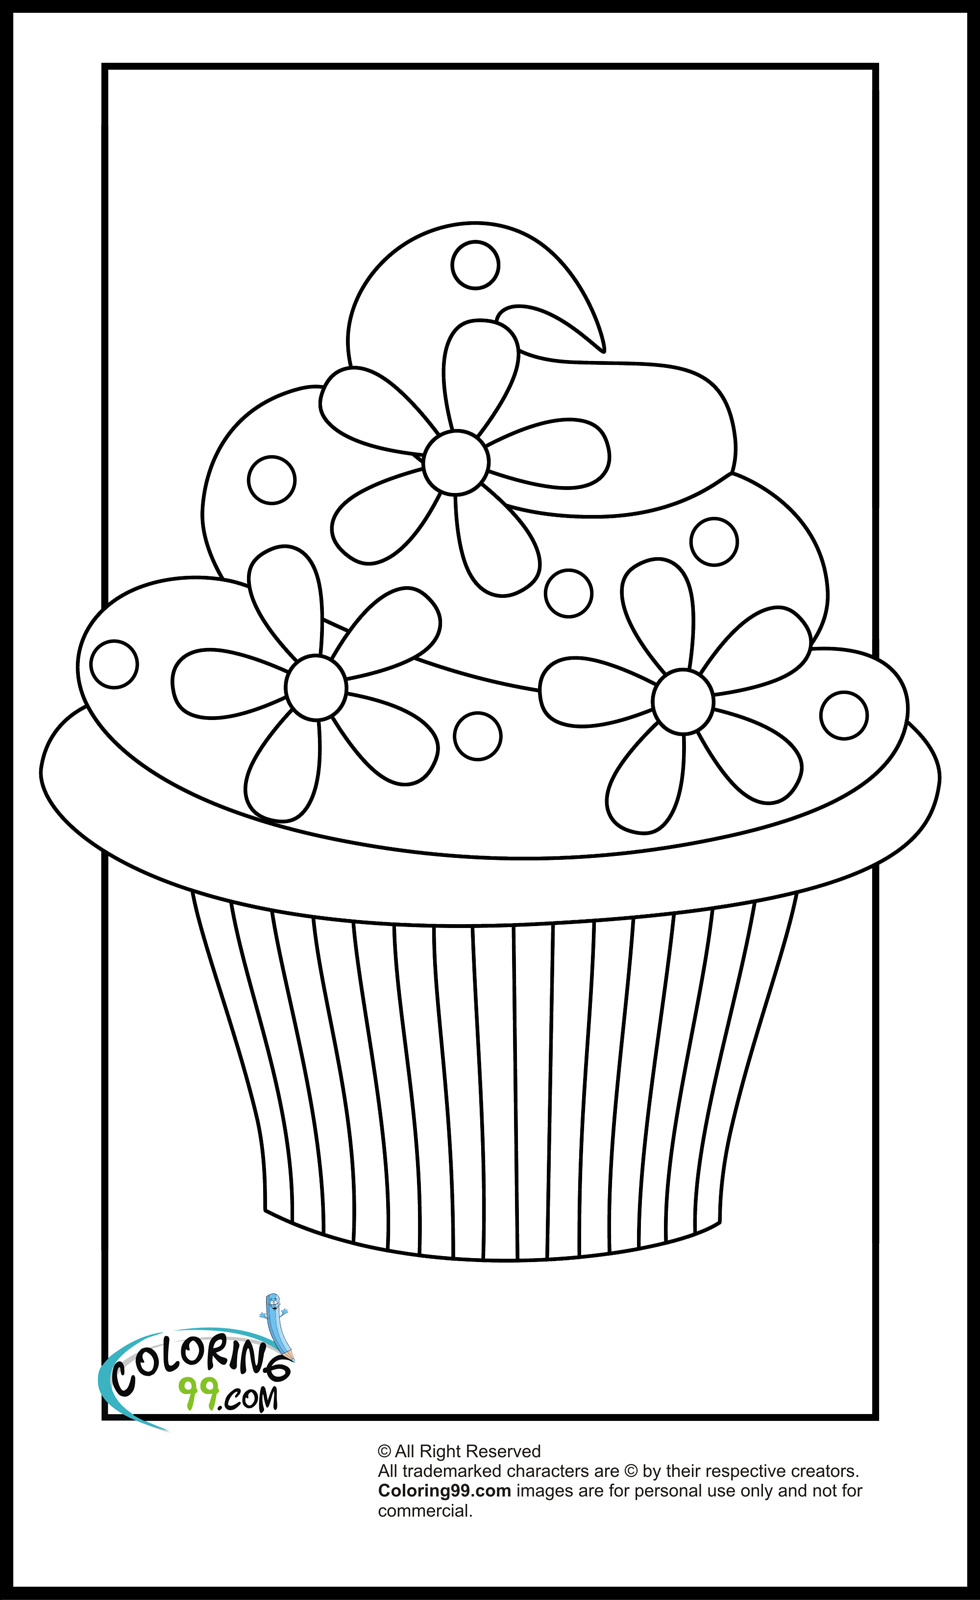  Cupcake Coloring Pages For Kids 8